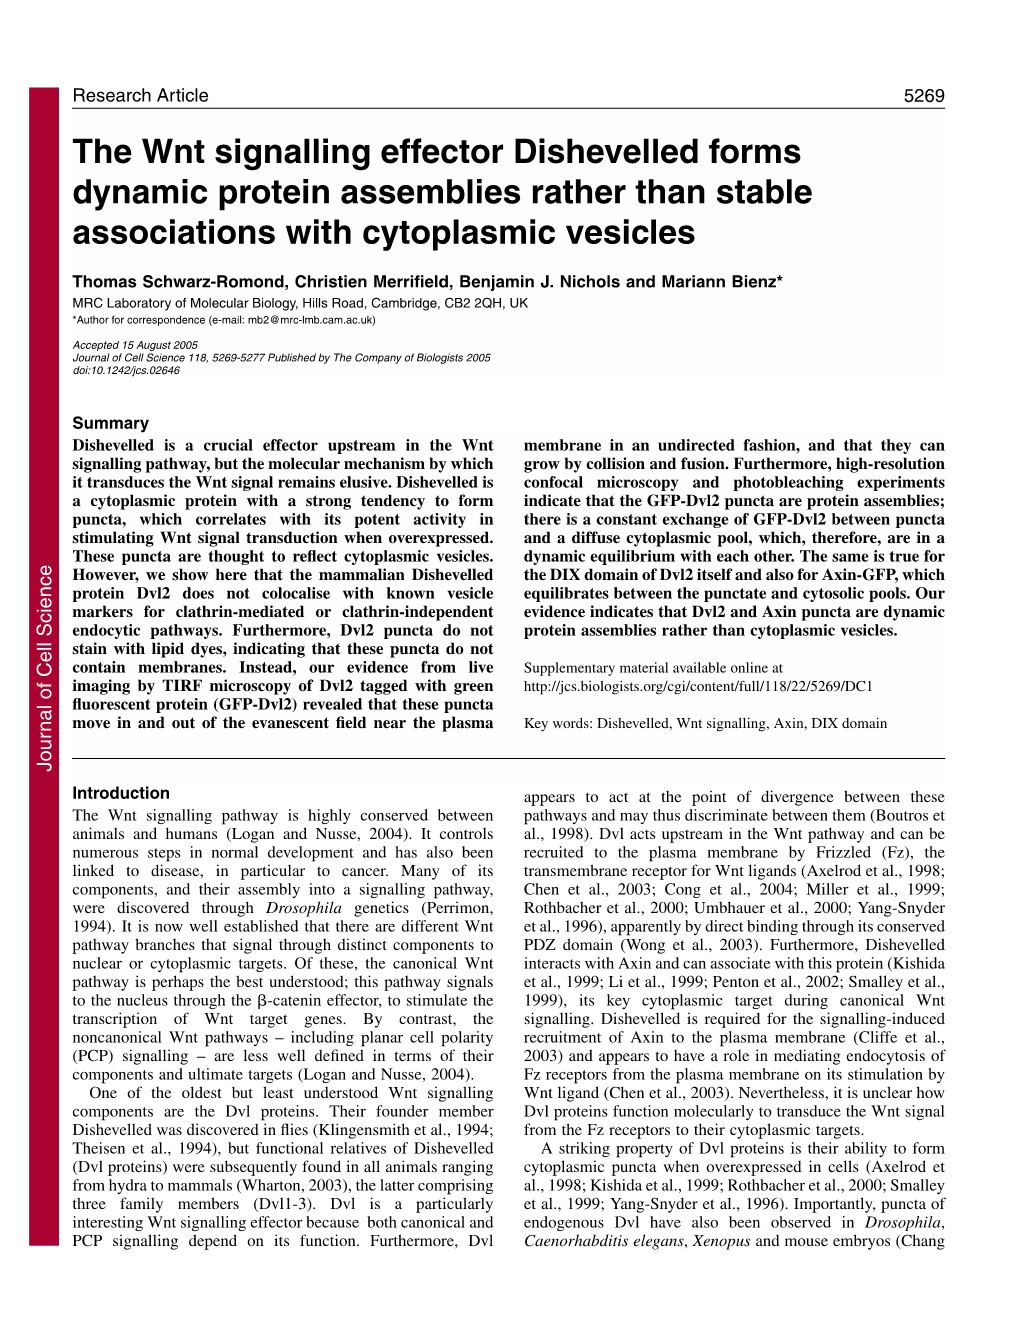 The Wnt Signalling Effector Dishevelled Forms Dynamic Protein Assemblies Rather Than Stable Associations with Cytoplasmic Vesicles